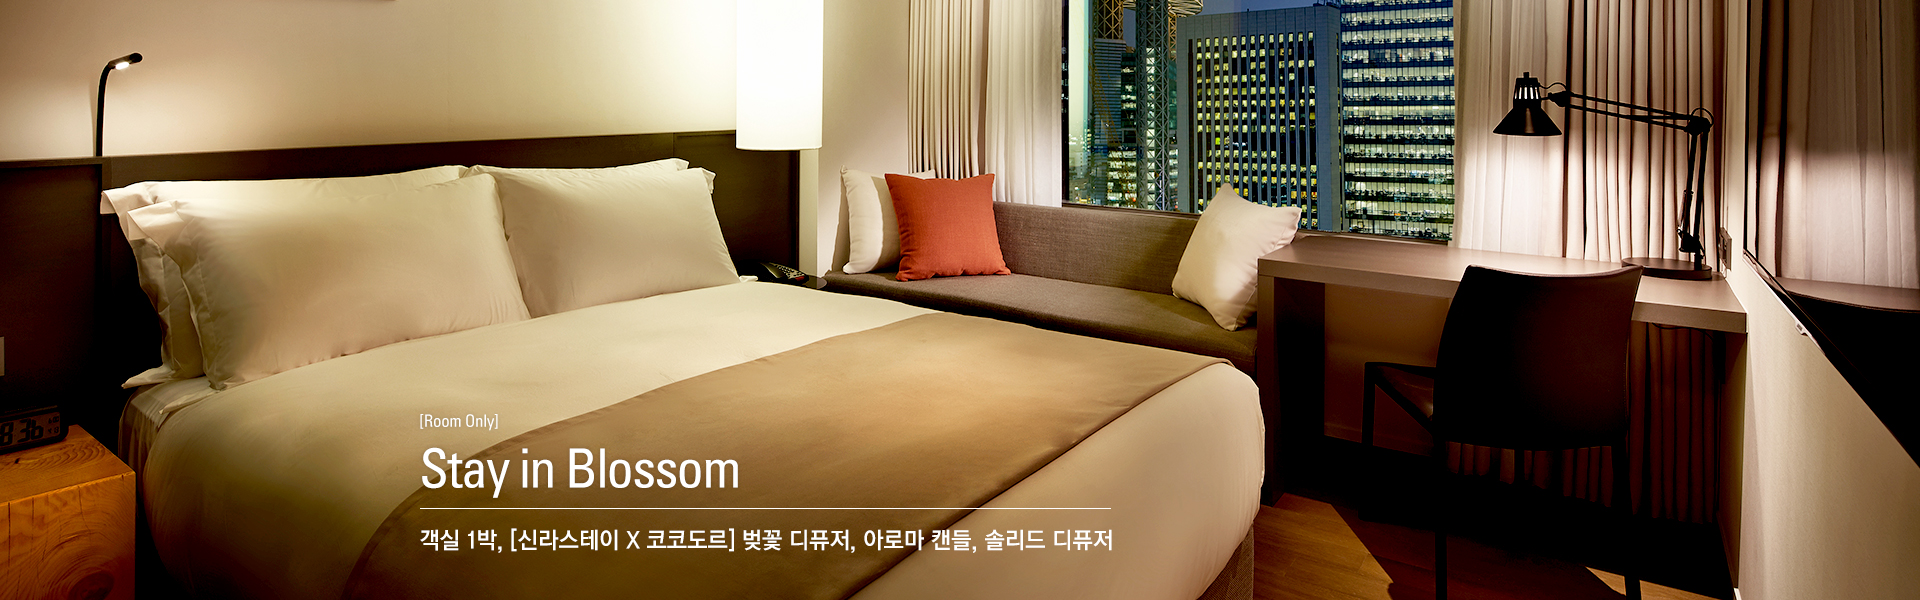 Stay in Blossom - Room Only